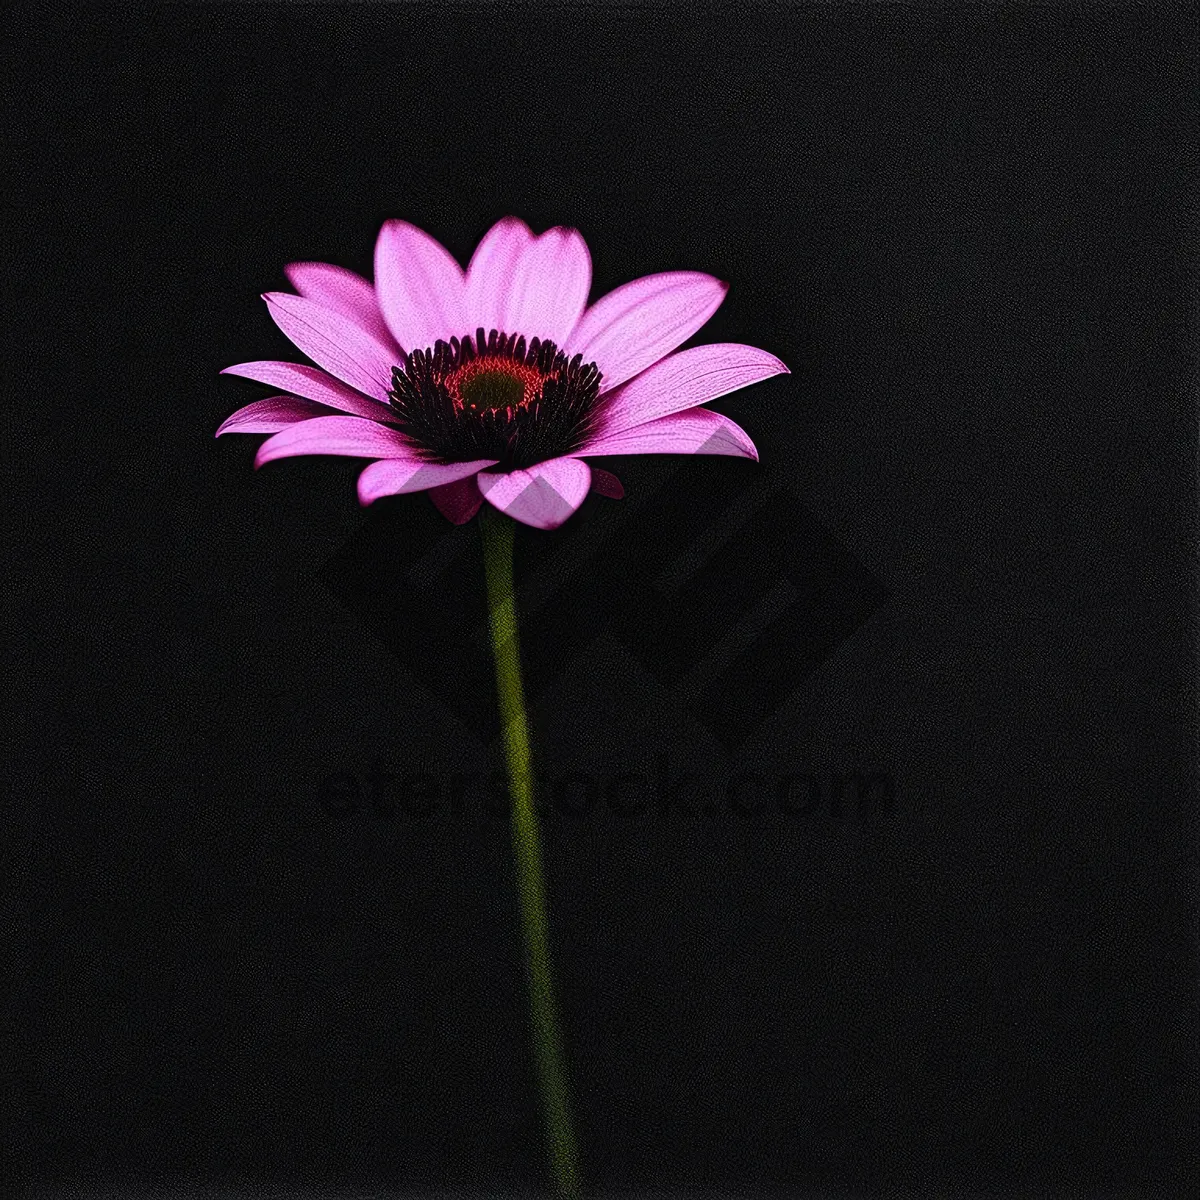 Picture of Vibrant Blooming Daisy in Pink - Floral Spring Blossom